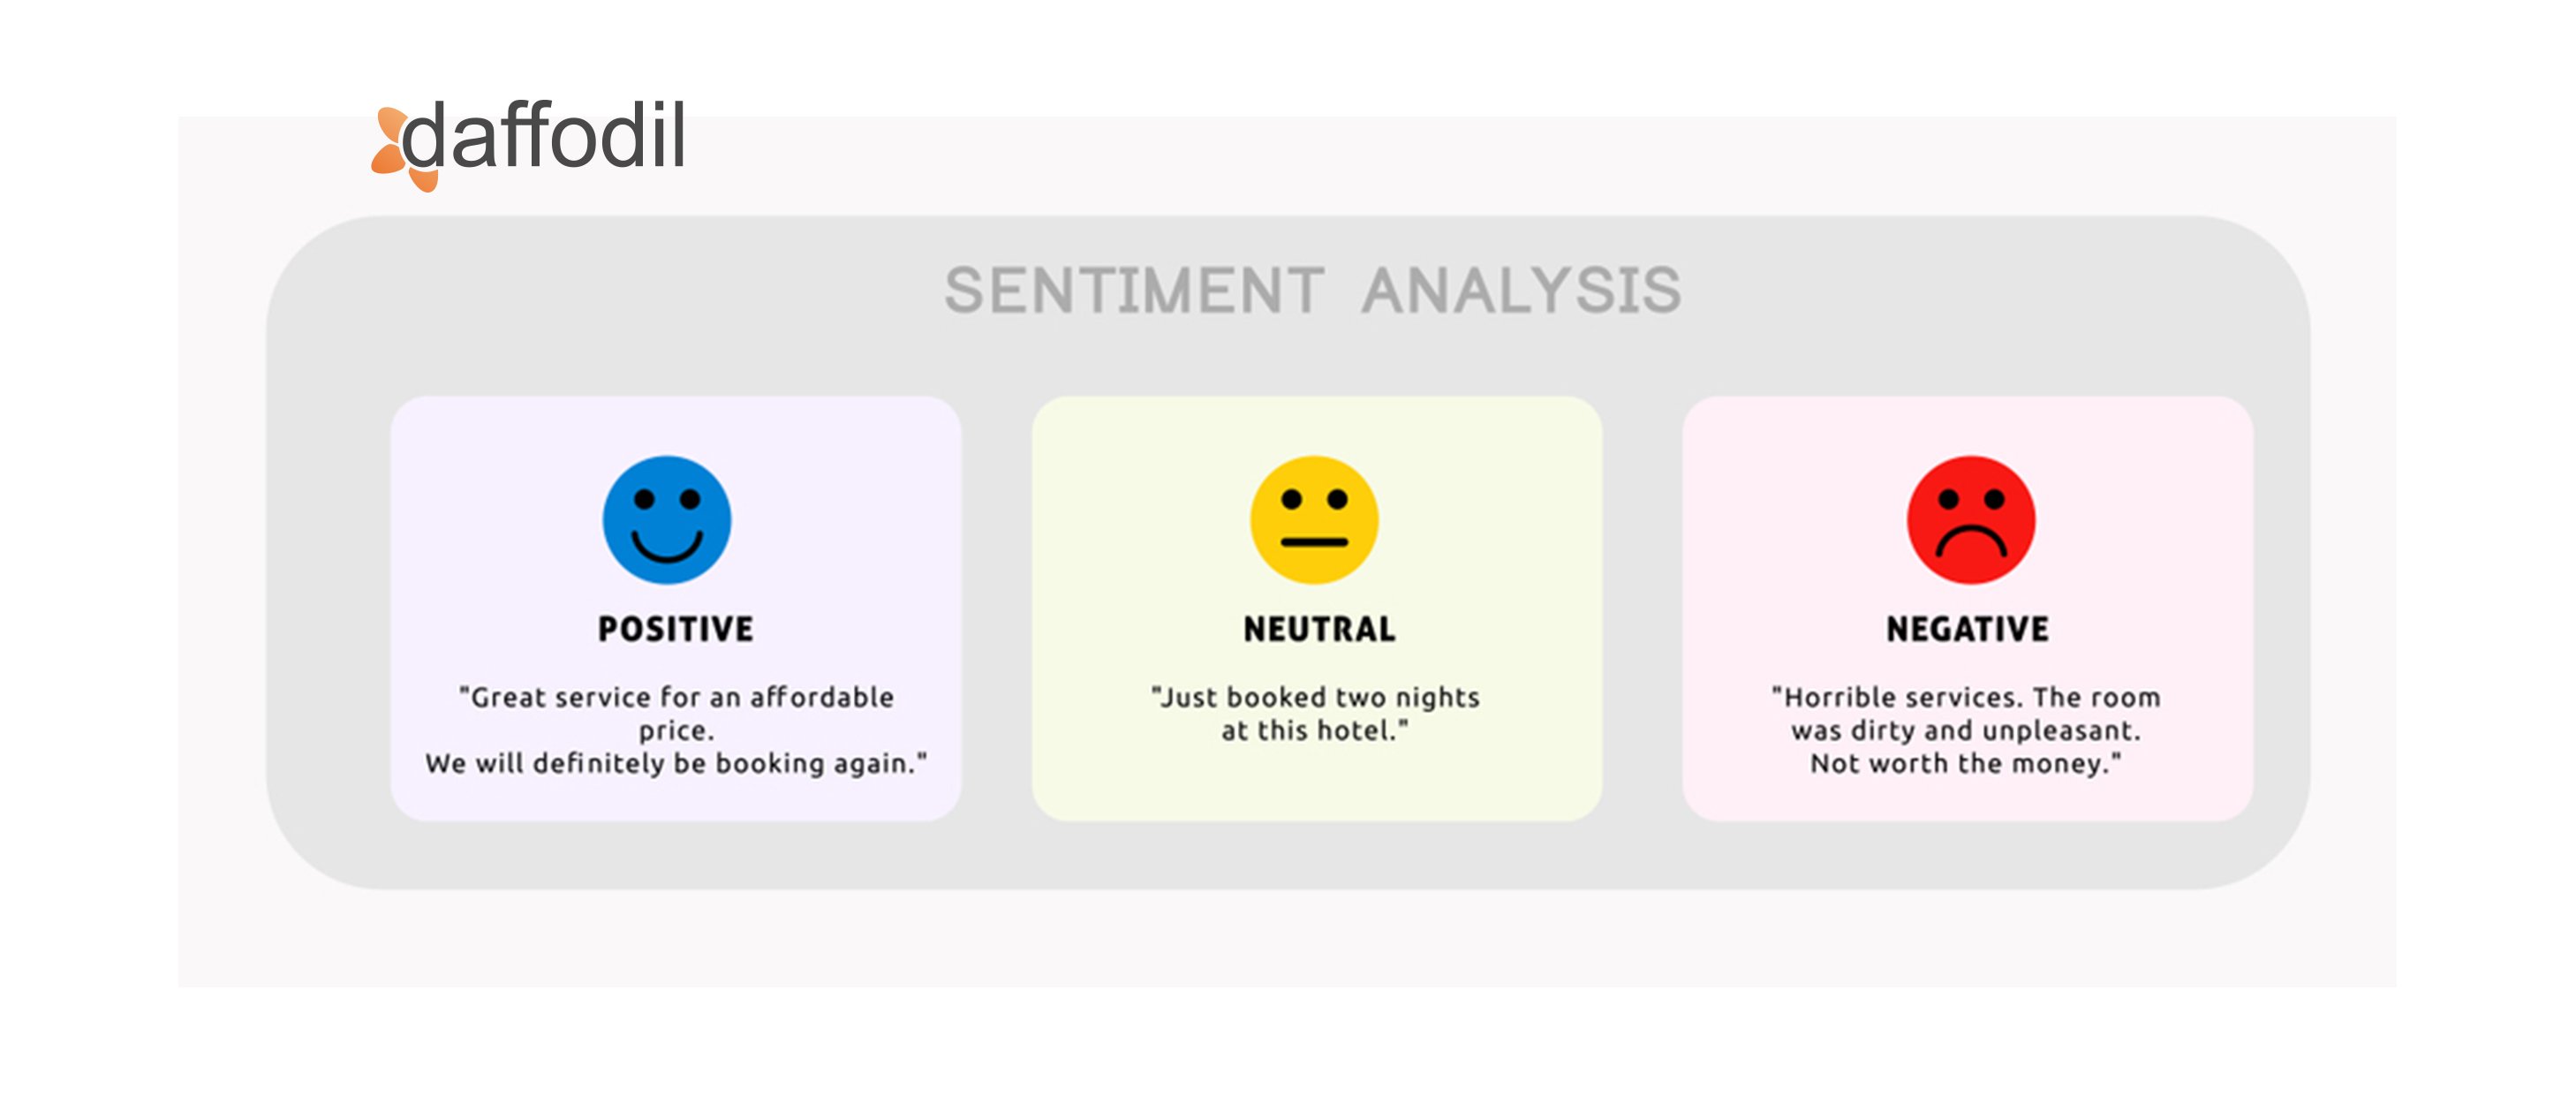 How To Prepare The Sentiment Analysis Process